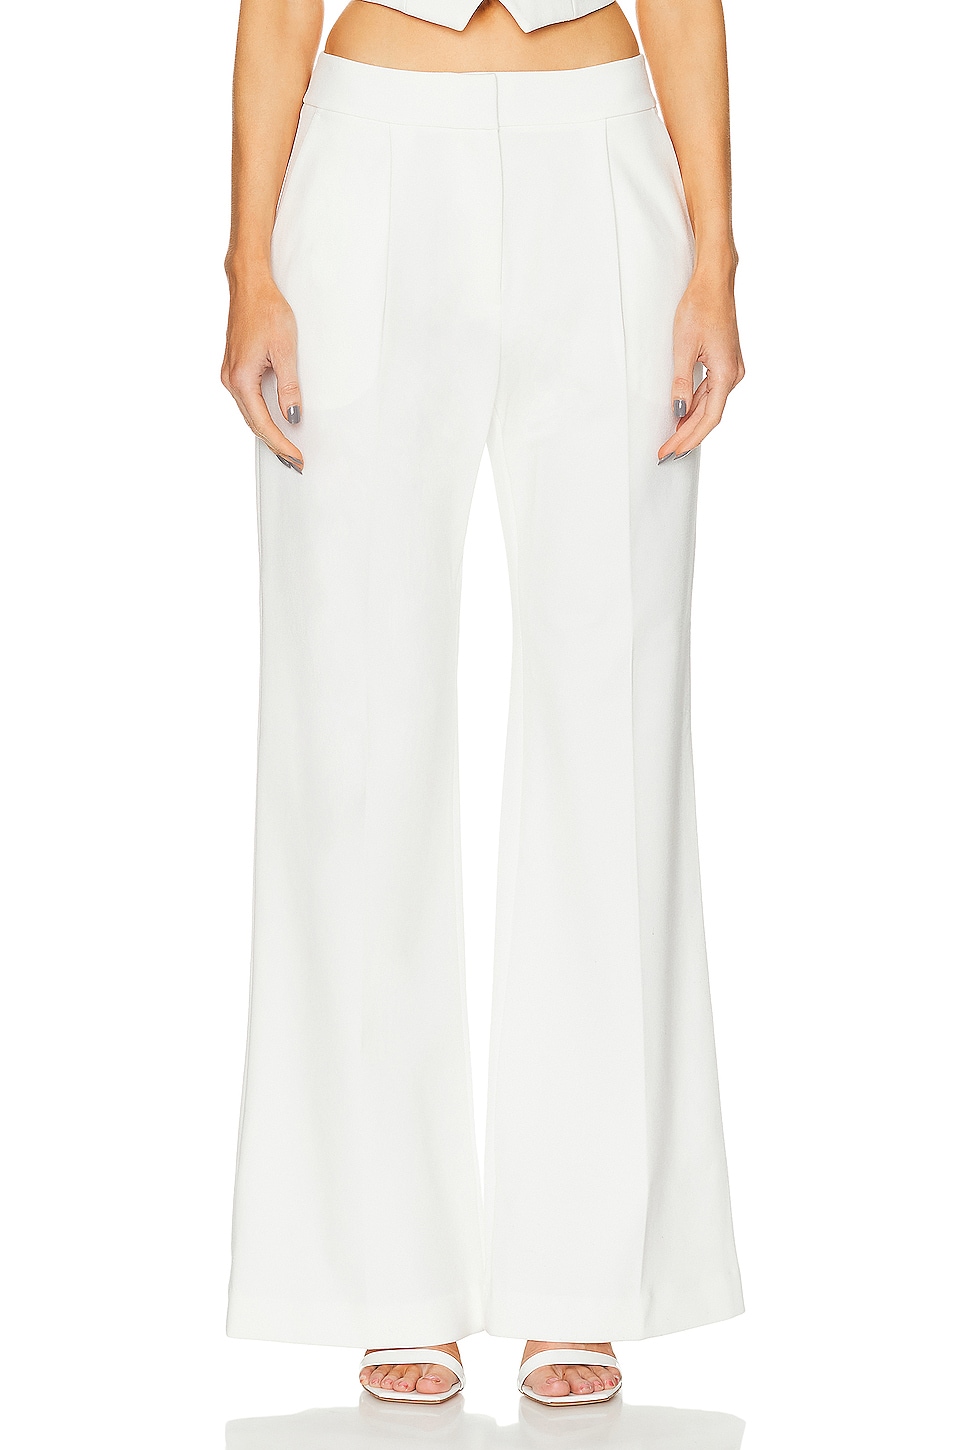 Image 1 of SANS FAFF Pin Tuck Palazzo Pant in White